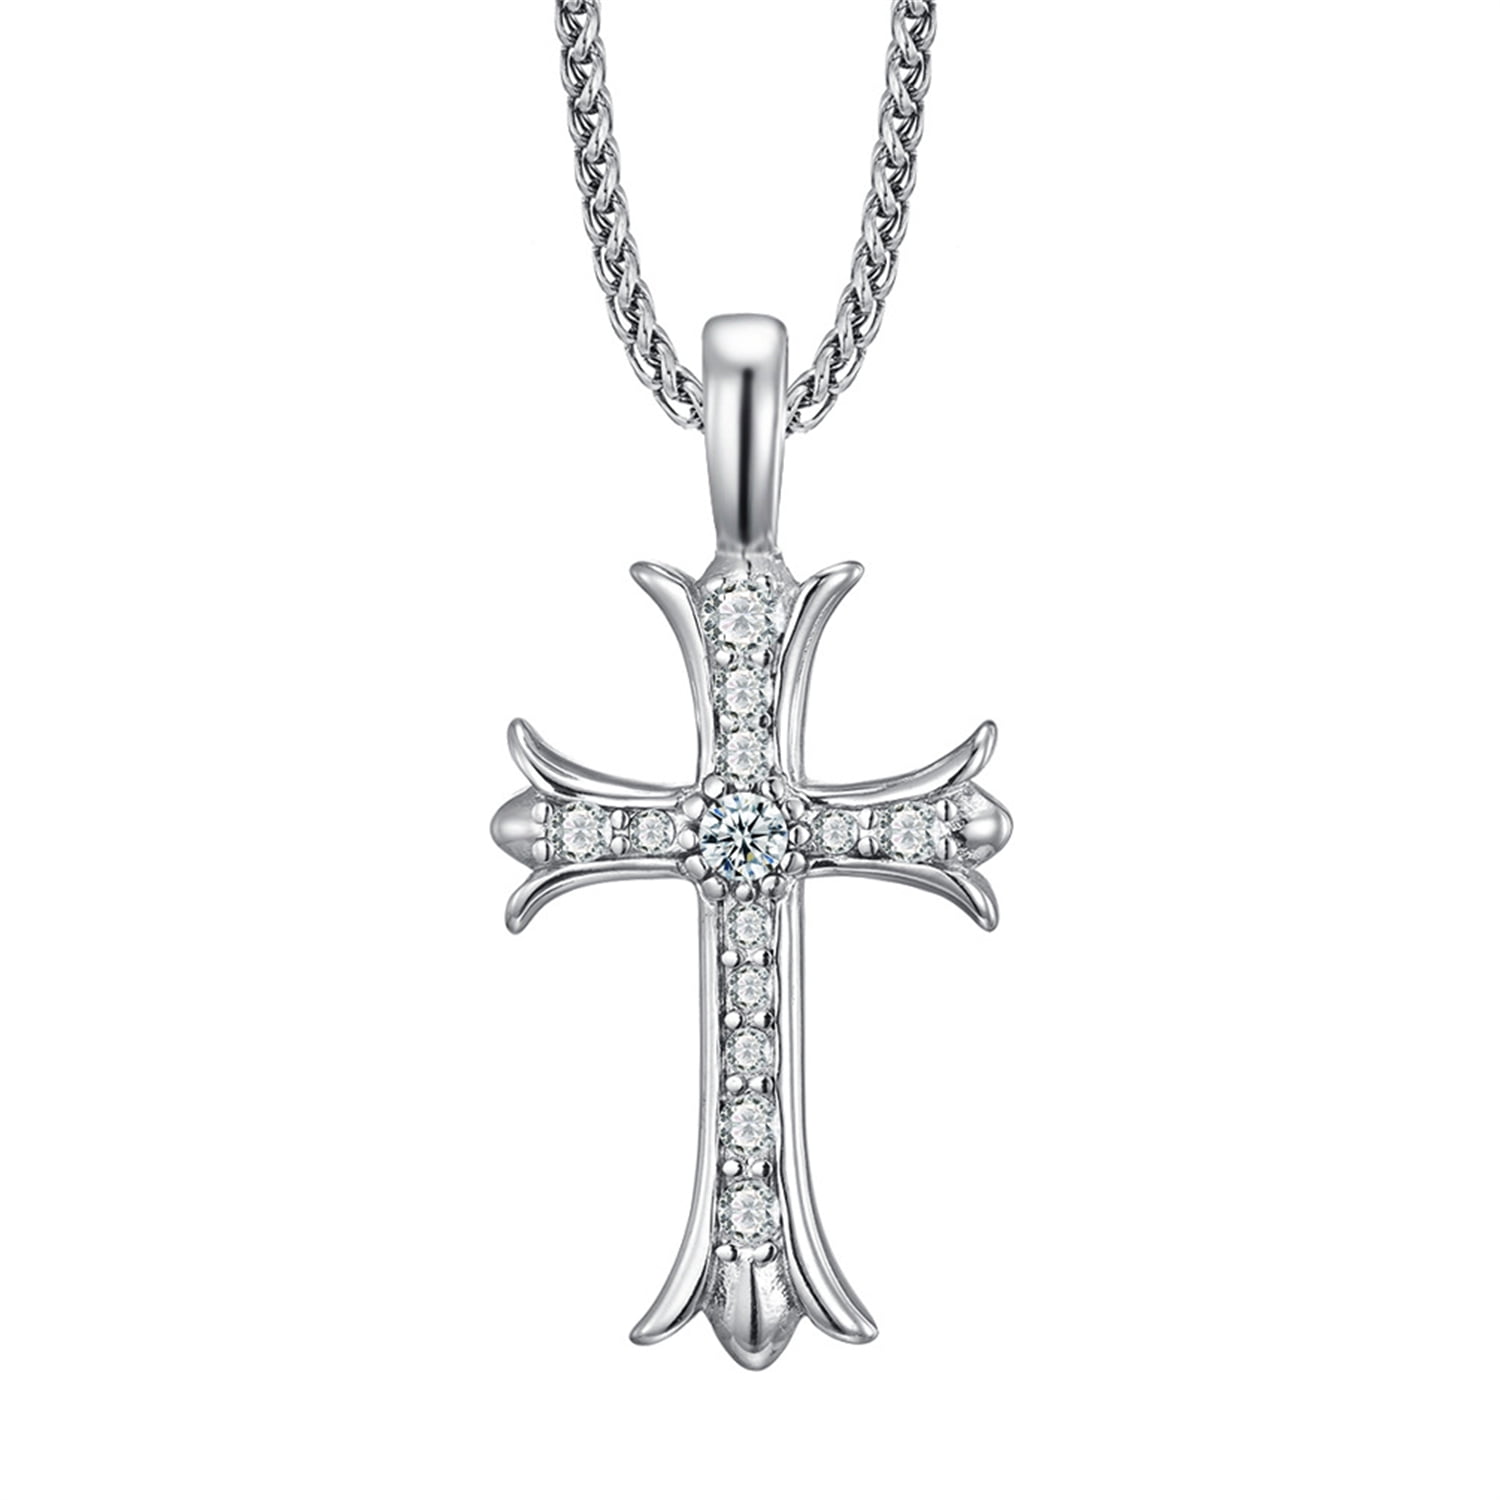 Details about   Fashion Men Titanium Stainless Steel 49 mm Silver Nail Cross Necklace 23.5"